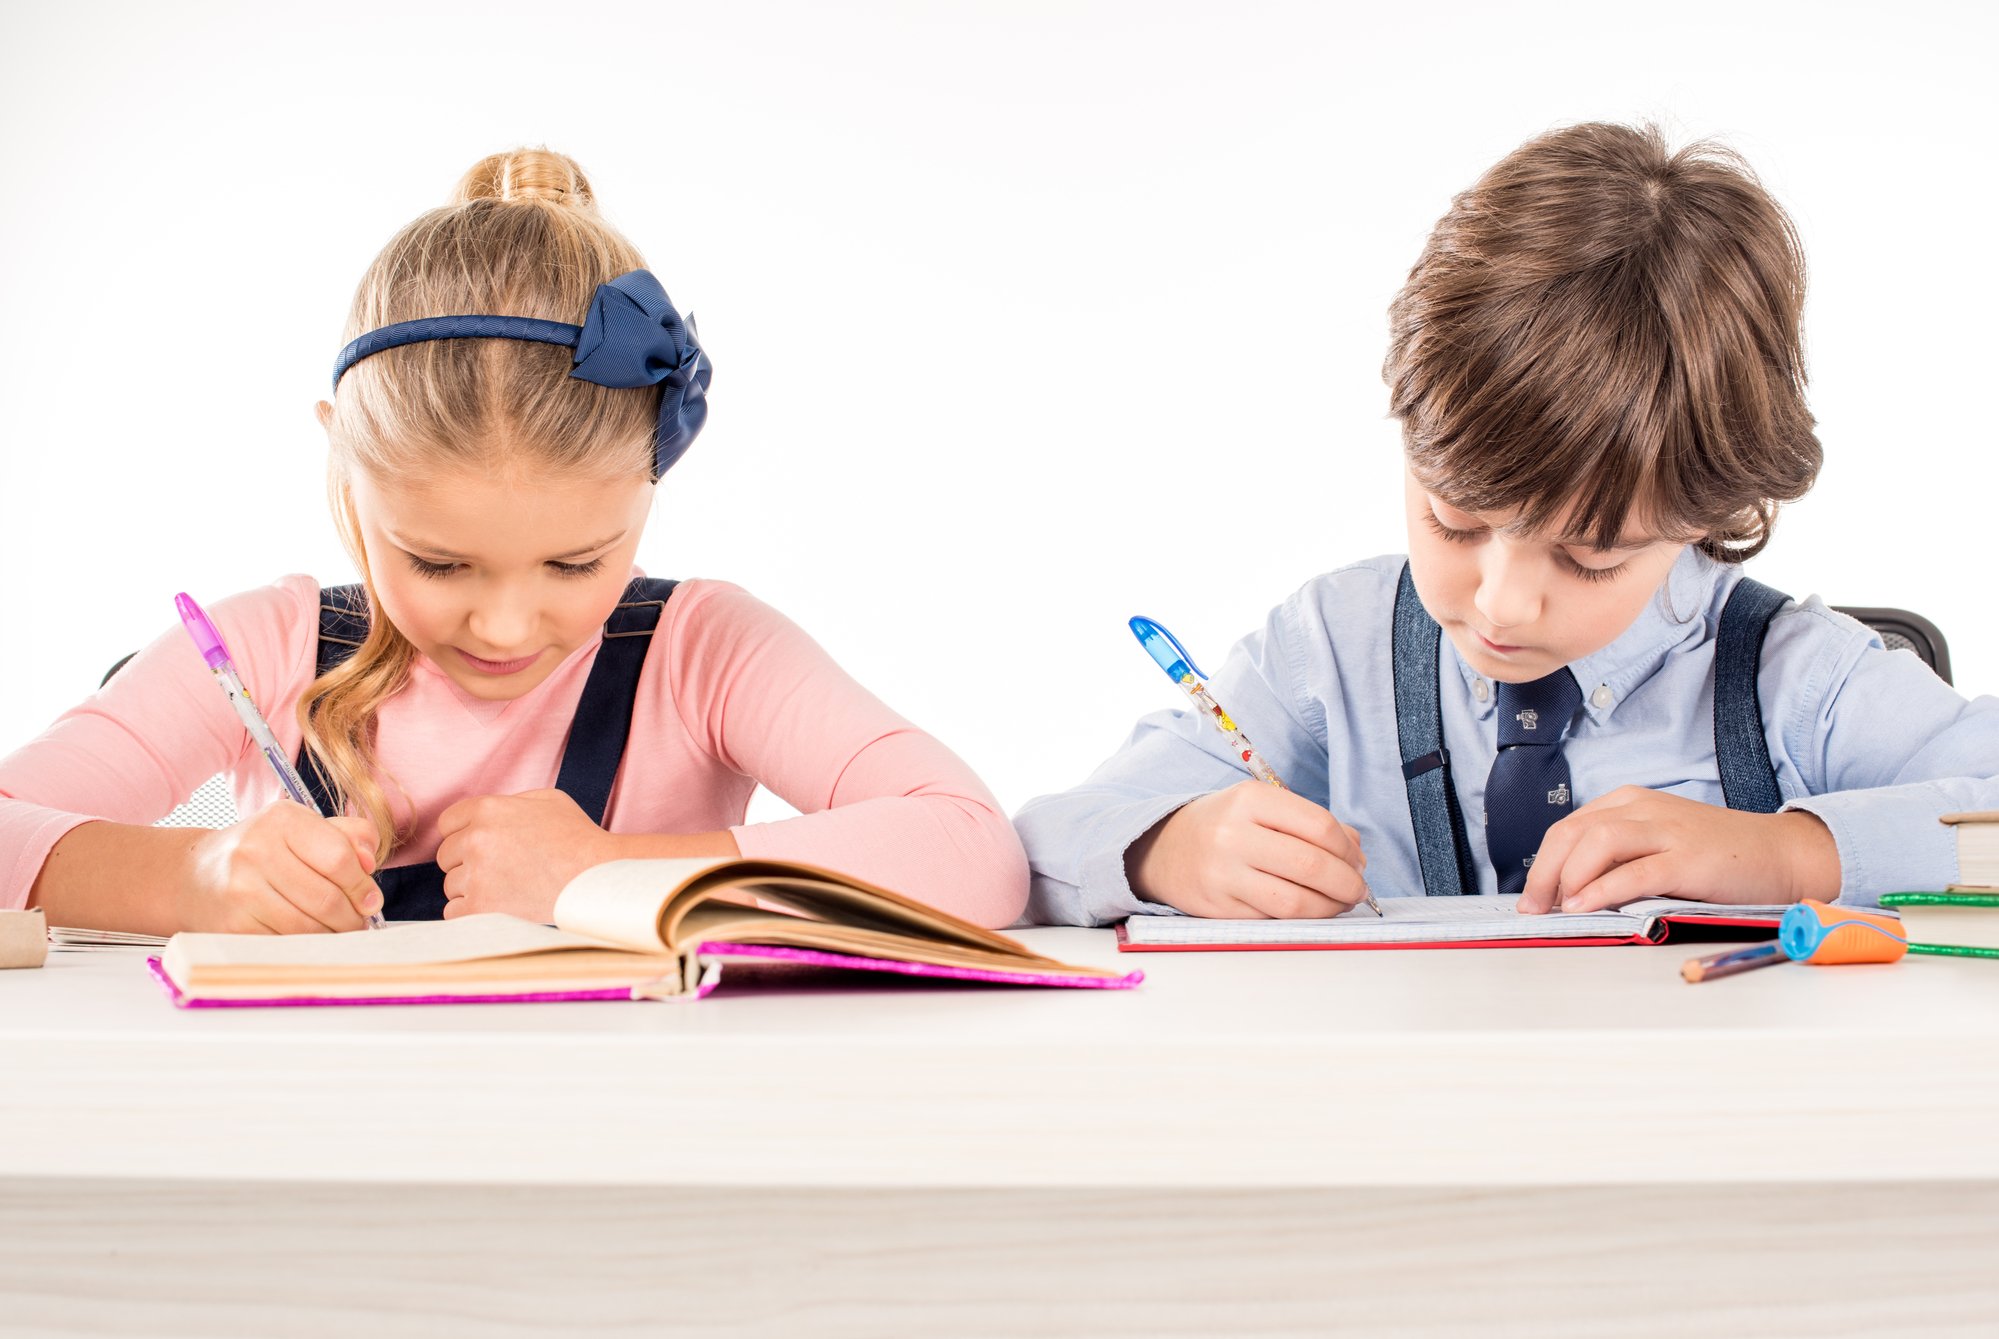 5 Tips To Help Kids Learn To Hold Their Pencil Correctly